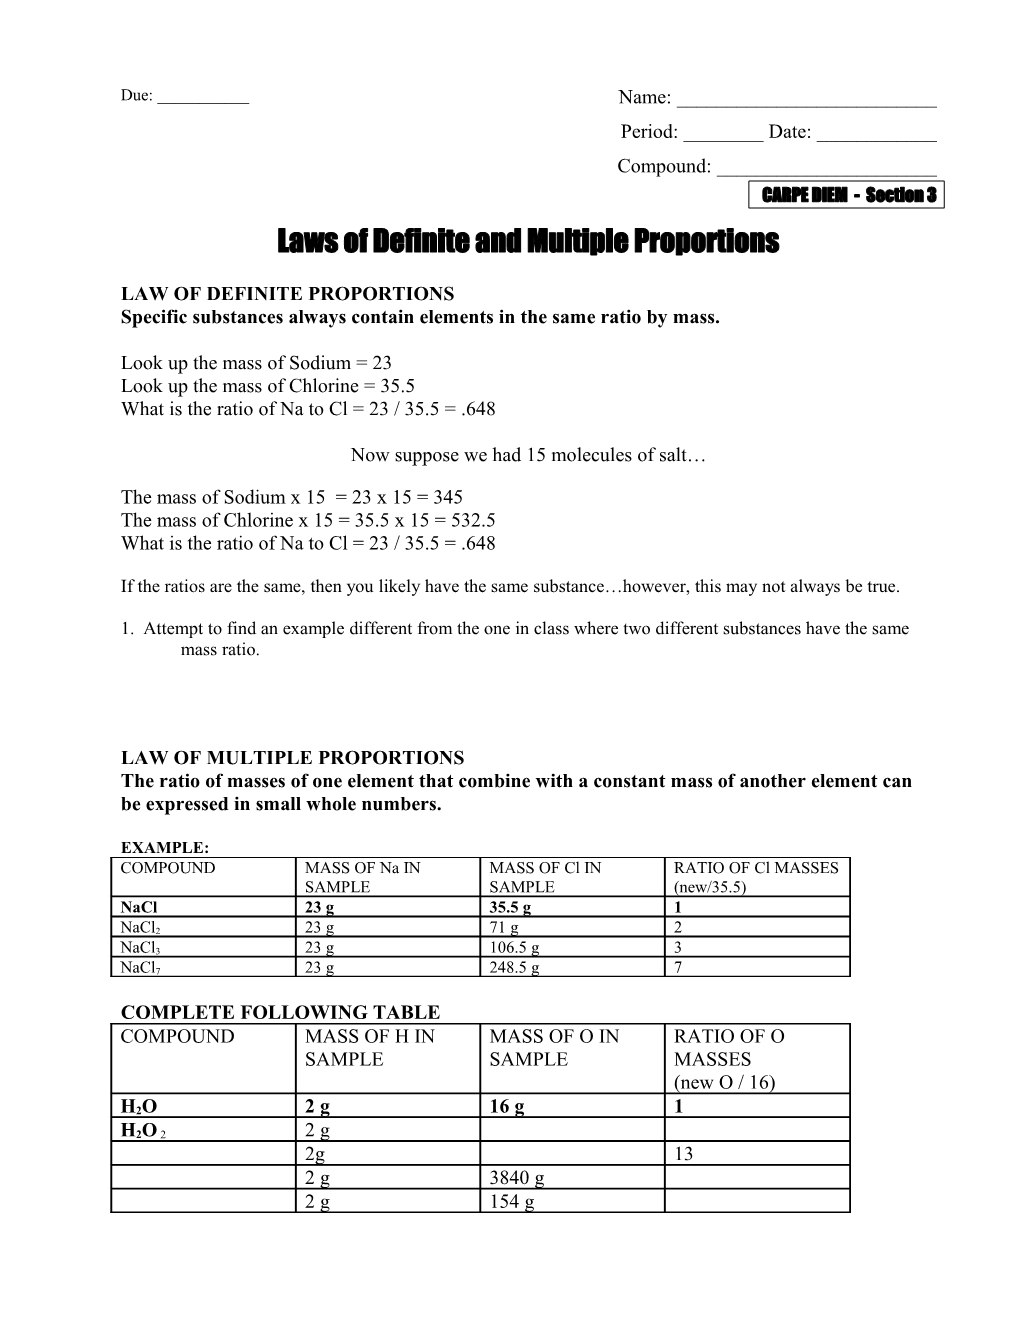 Laws of Definite and Multiple Proportions